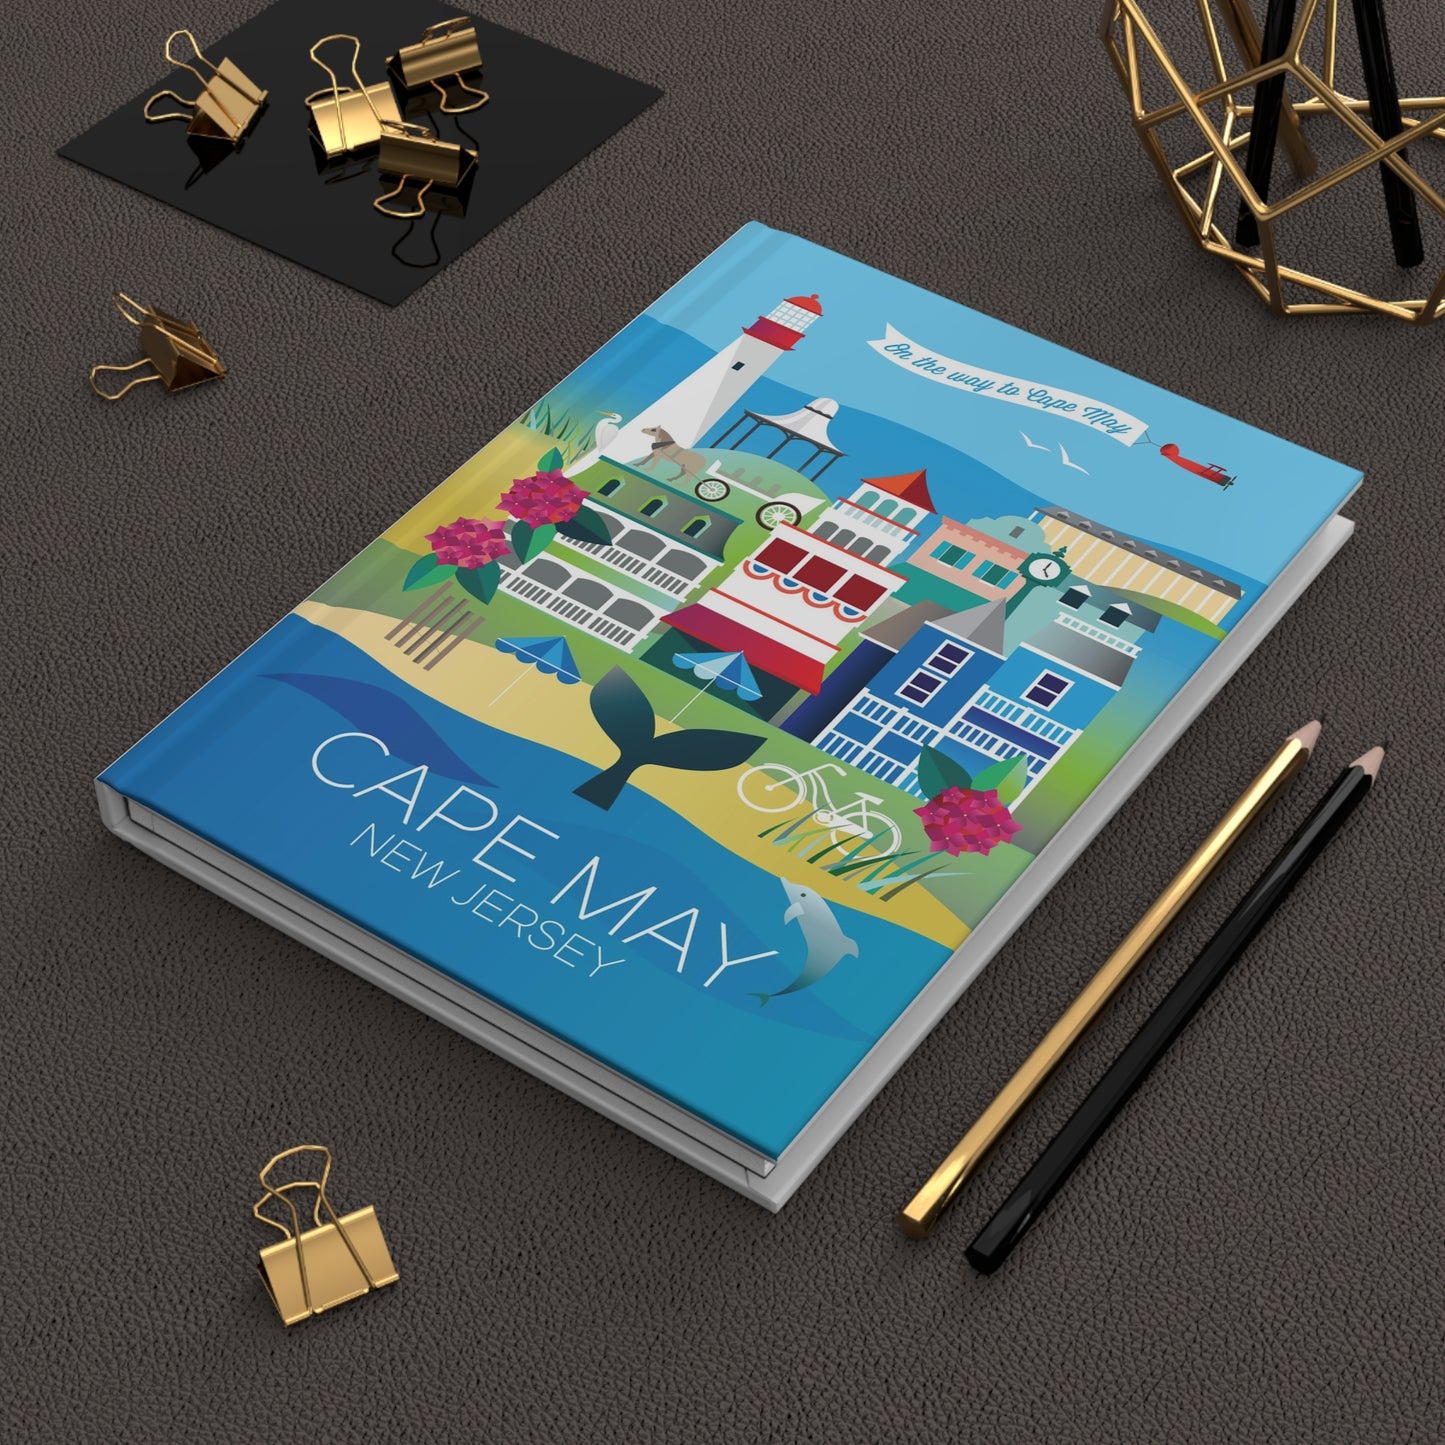 Cape May Hardcover Journal